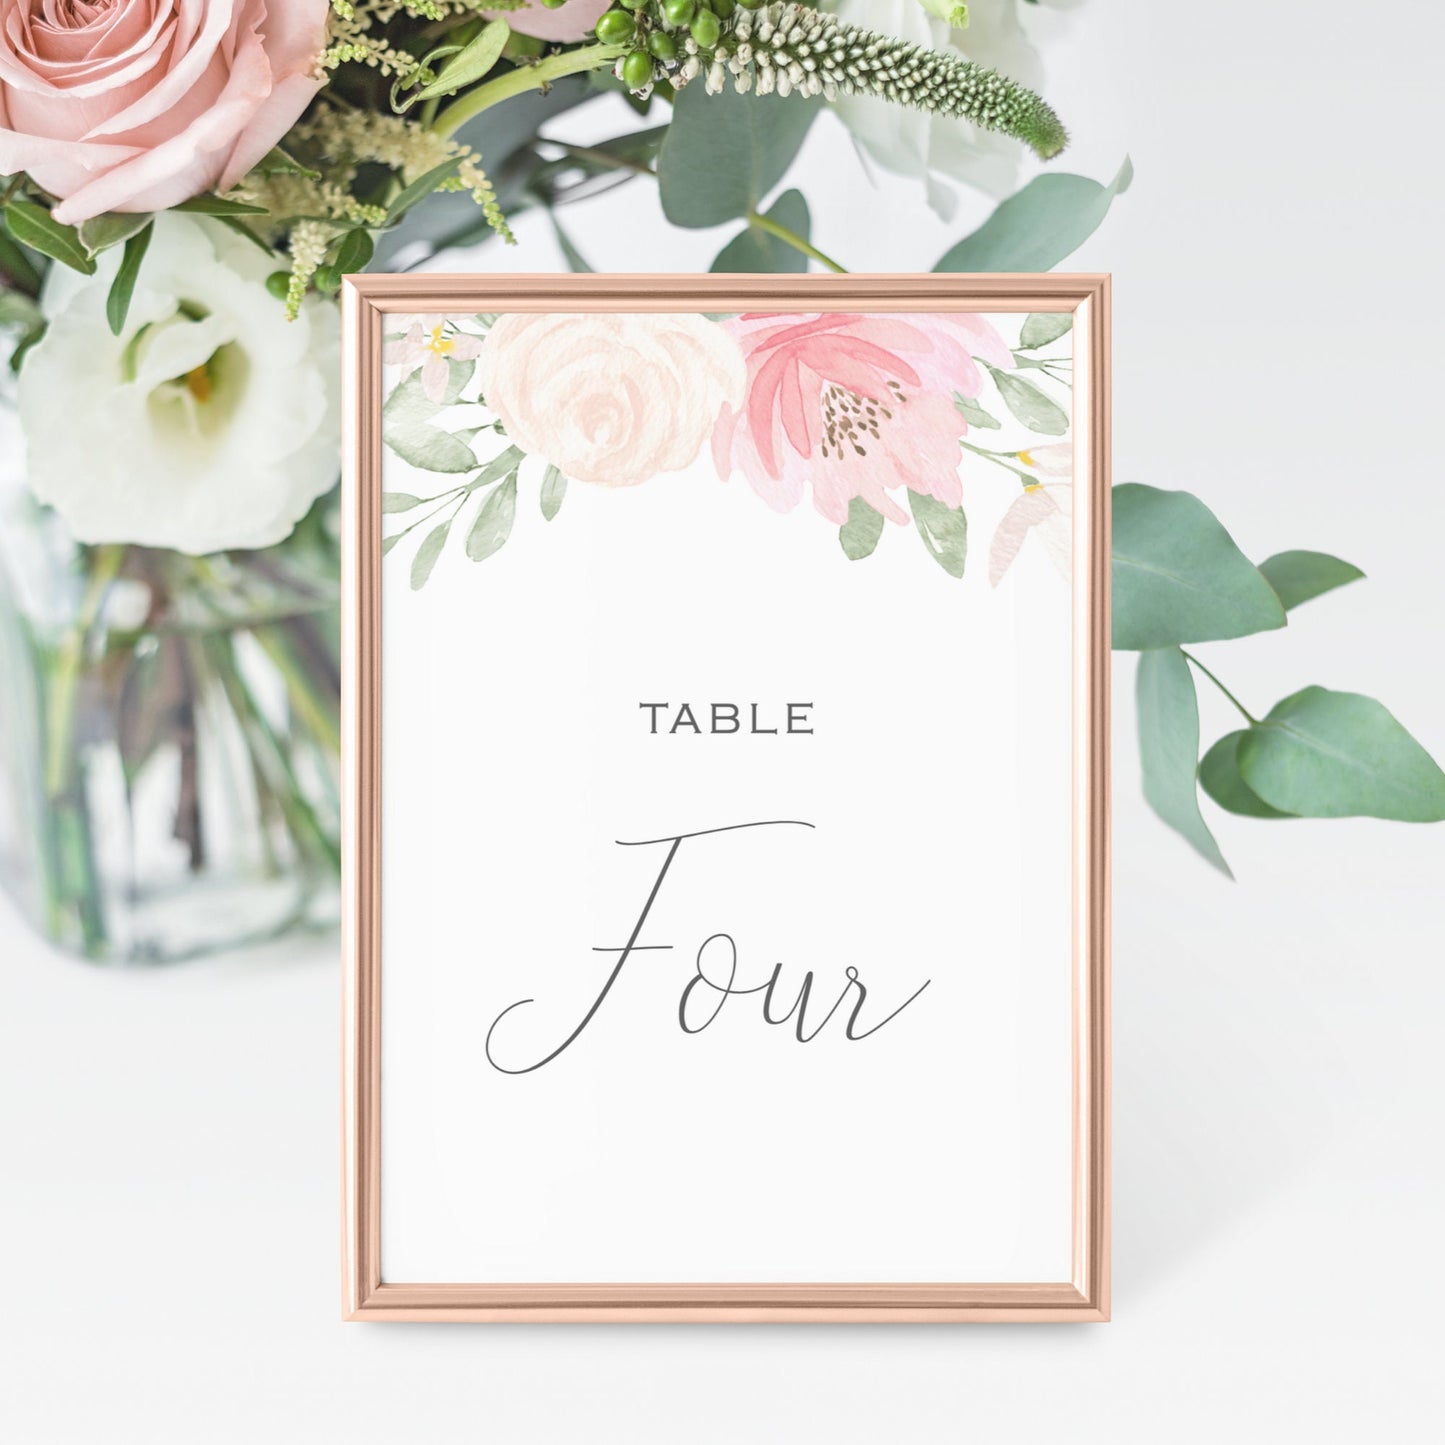 Editable Wedding Table Number Blush Floral Table Number Card 5x7 and 4x6 Template